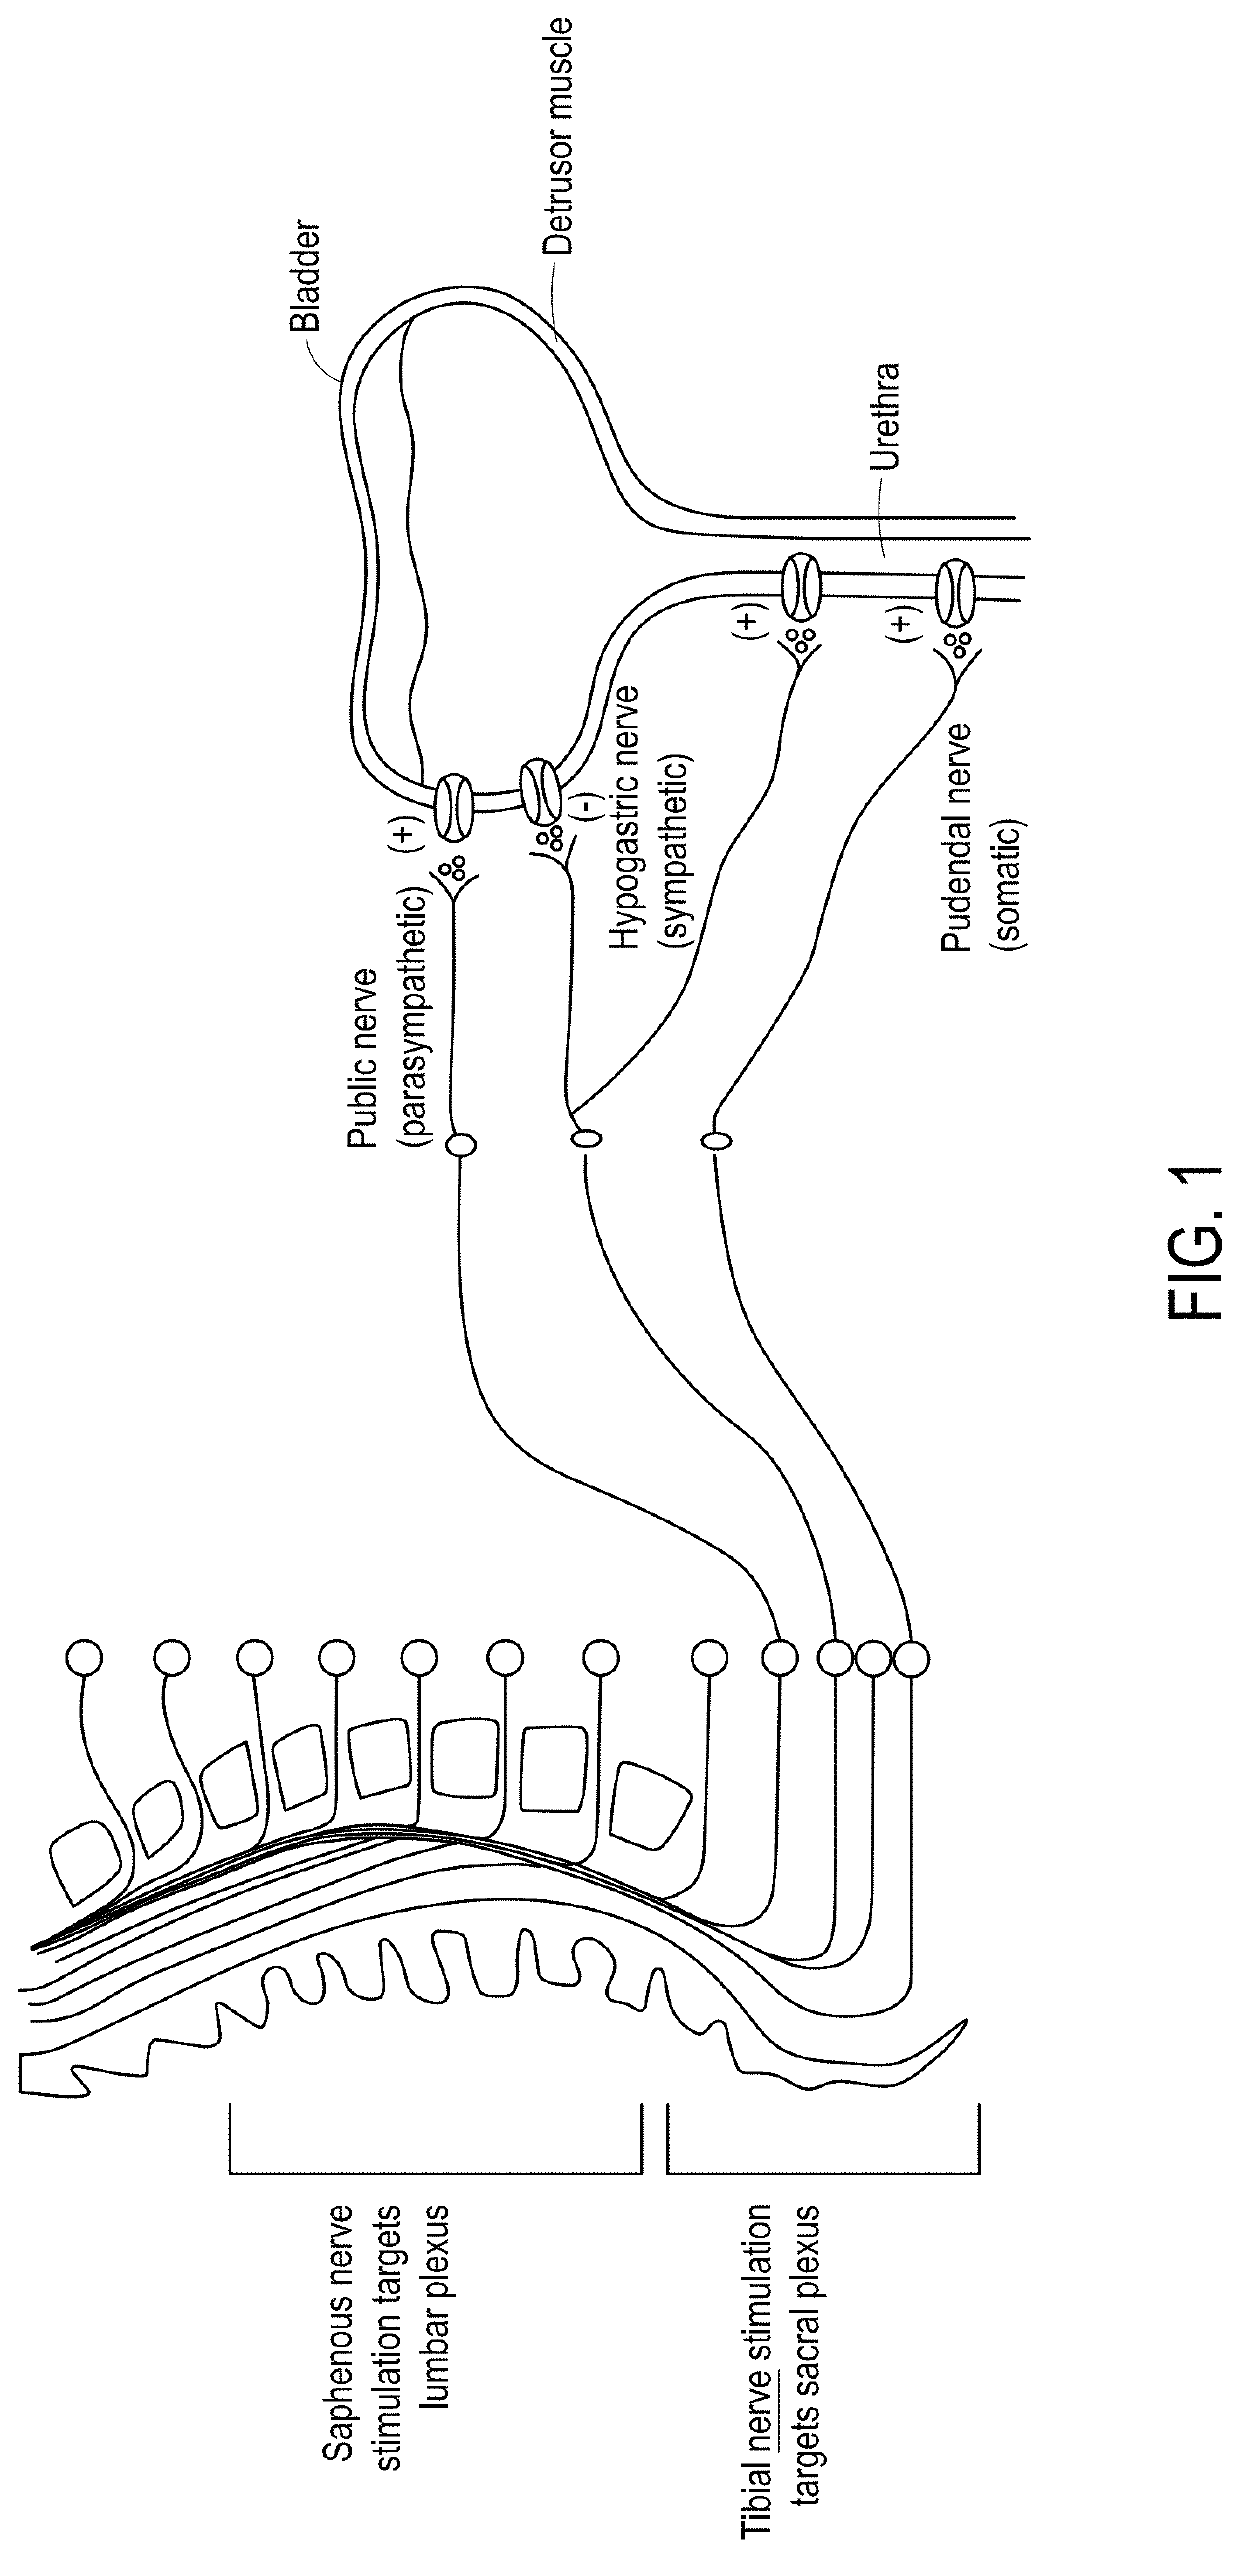 Systems, methods and devices for peripheral neuromodulation for treating diseases related to overactive bladder